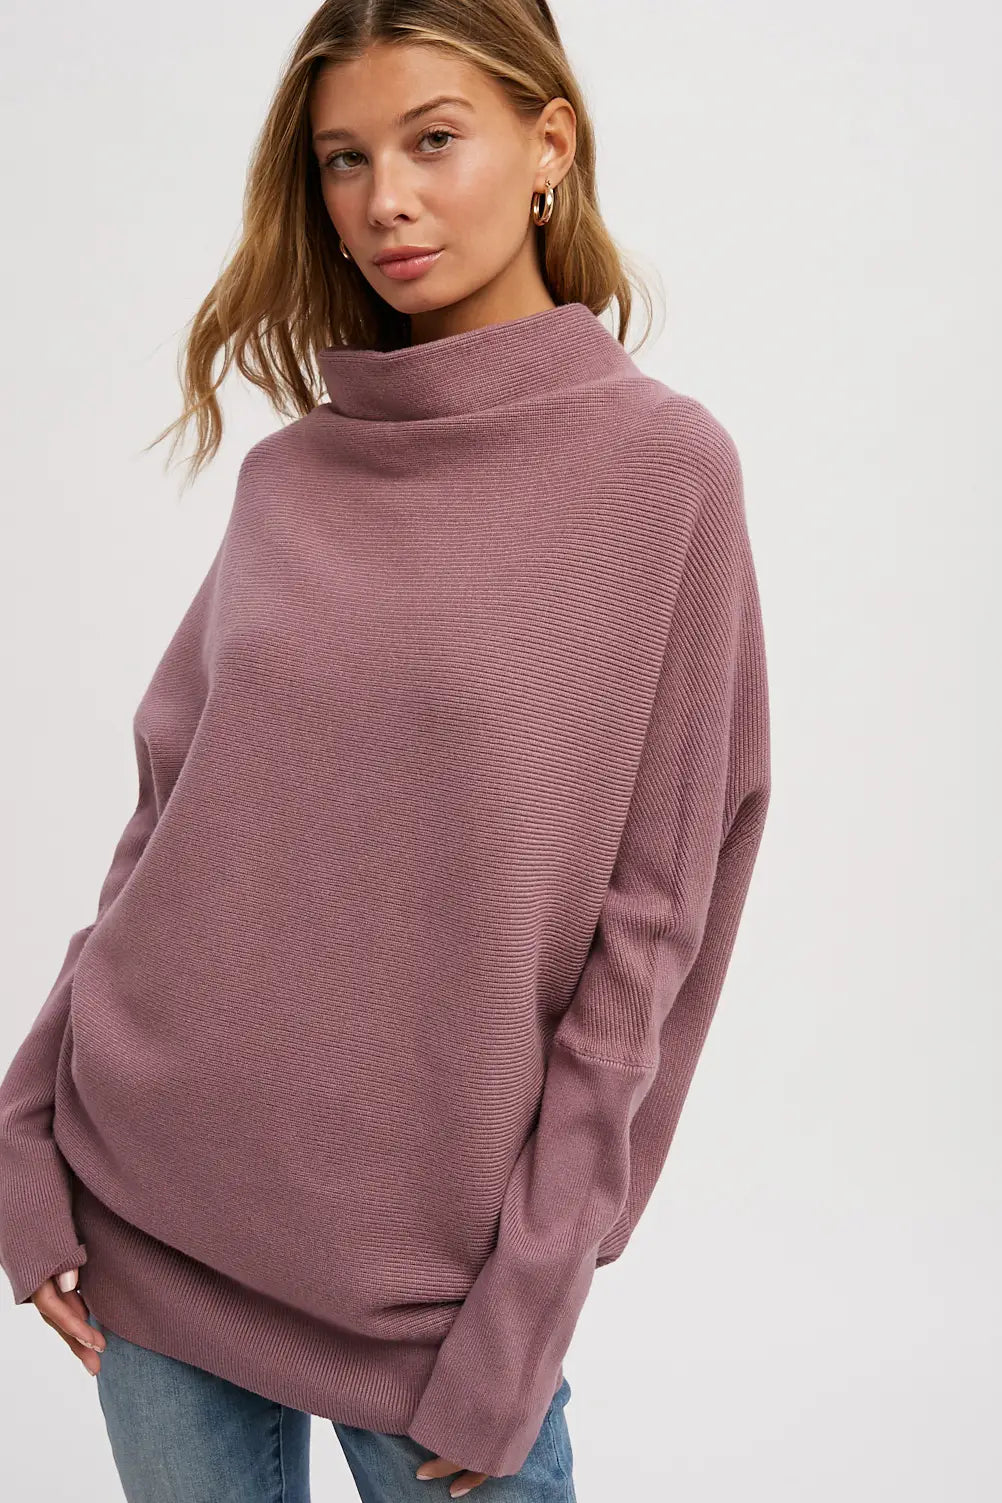 ** P/U at The French Twist Only ** Eggplant Slouch Neck Dolman Pullover